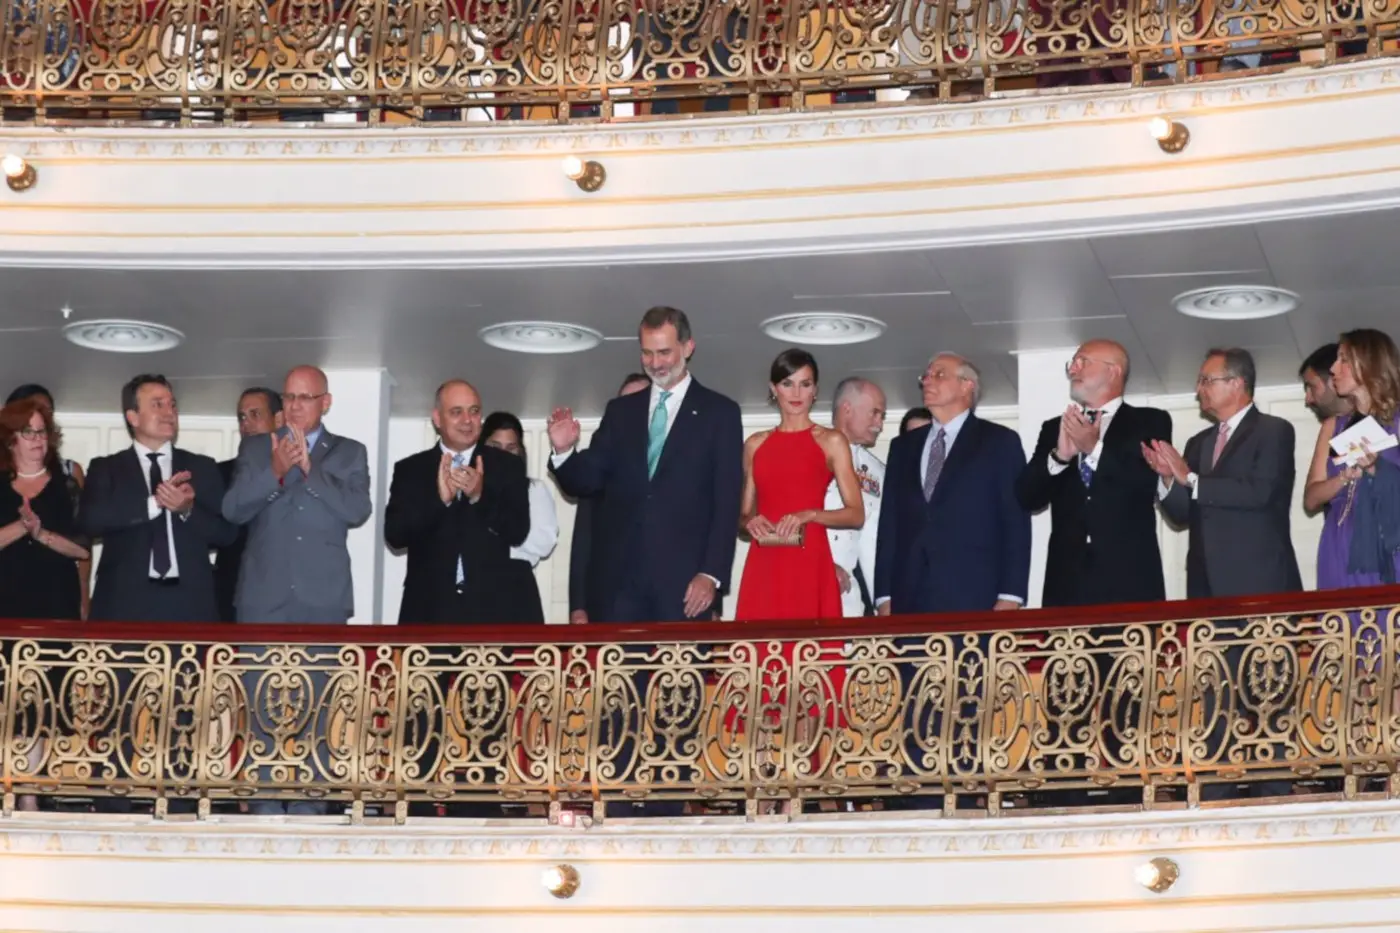 King Felipe and Queen Letizia attended Ballet Gala in Cuba on day 1 of State visit